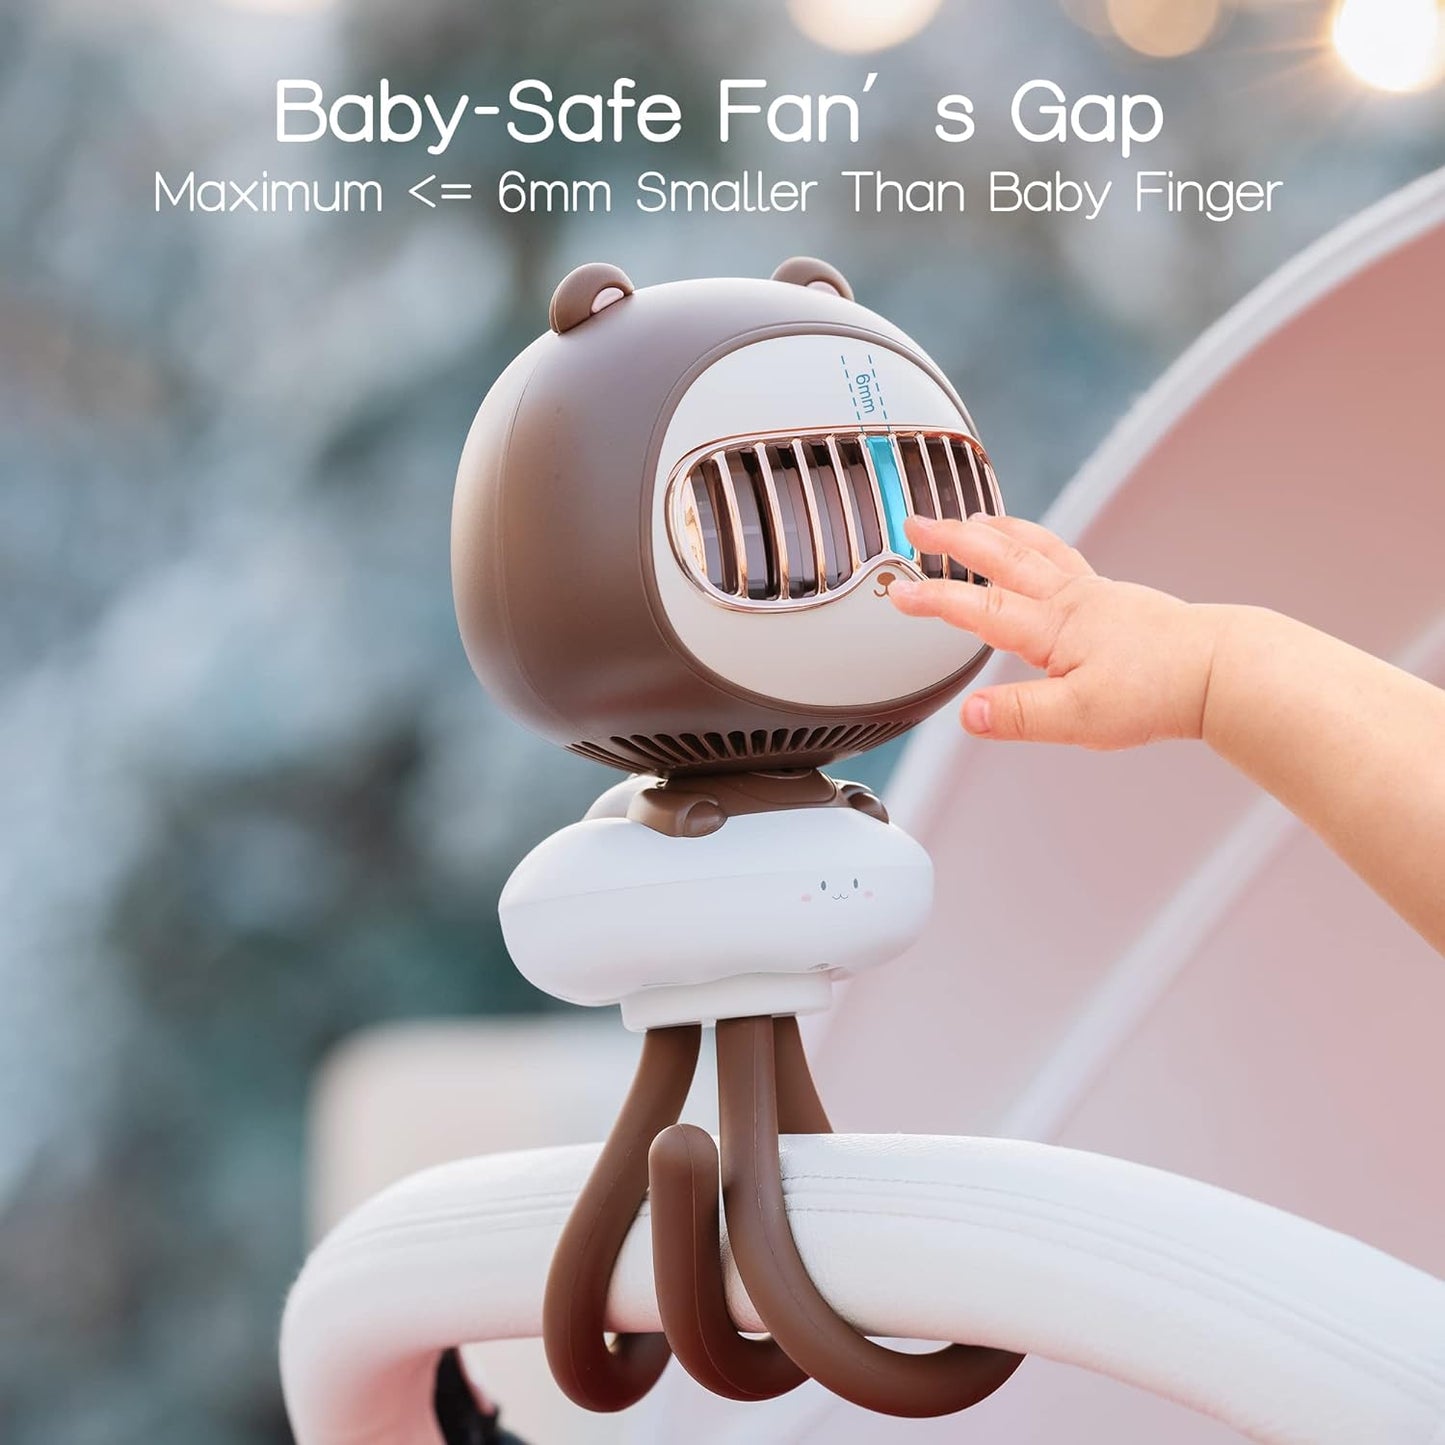 KinYiLO Cute Stroller Fan Clip On for Baby, Portable Baby Stroller Fans Bladeless, 4 Speeds Auto Oscillating, 4000mAh Rechargeable Battery Powered, Flexible Tripod Small Cooling Fan for Crib/Car seat